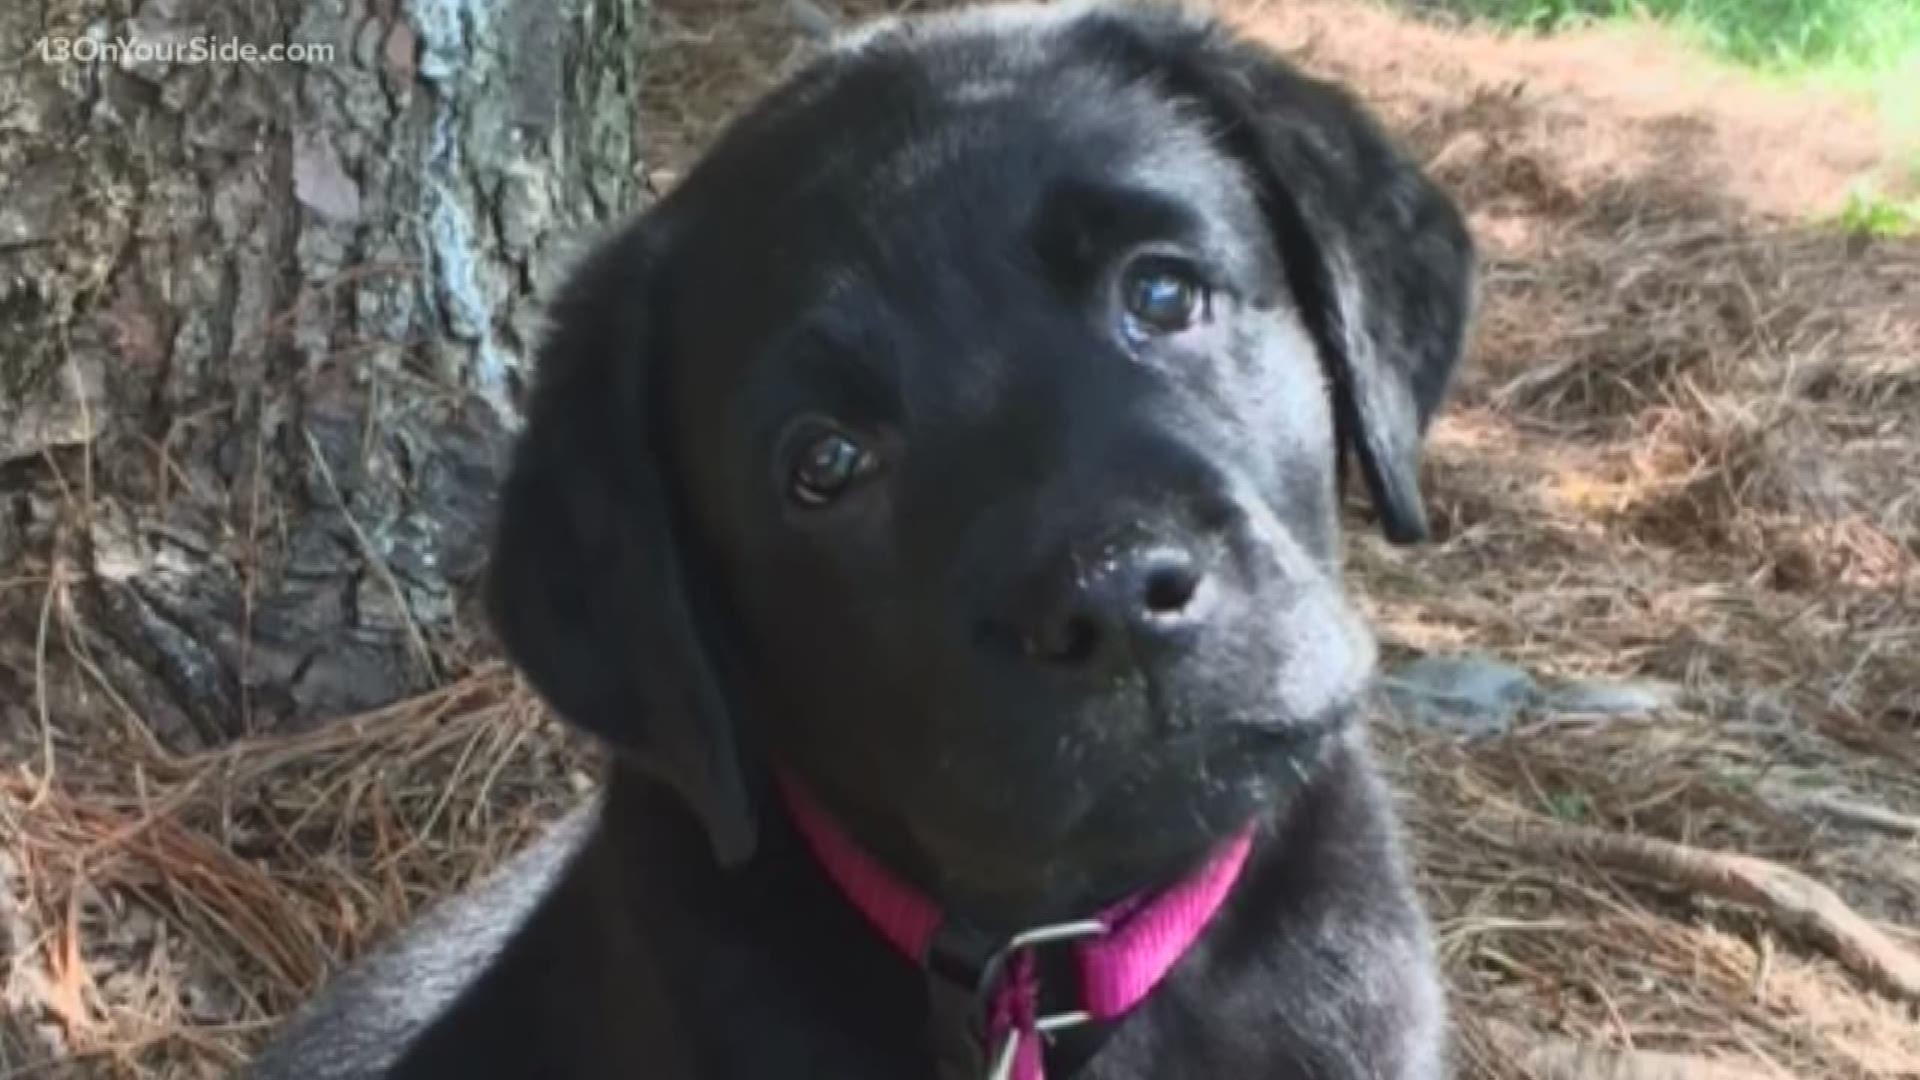 Our Paws With A Cause puppy leaves to continue her service dog training.